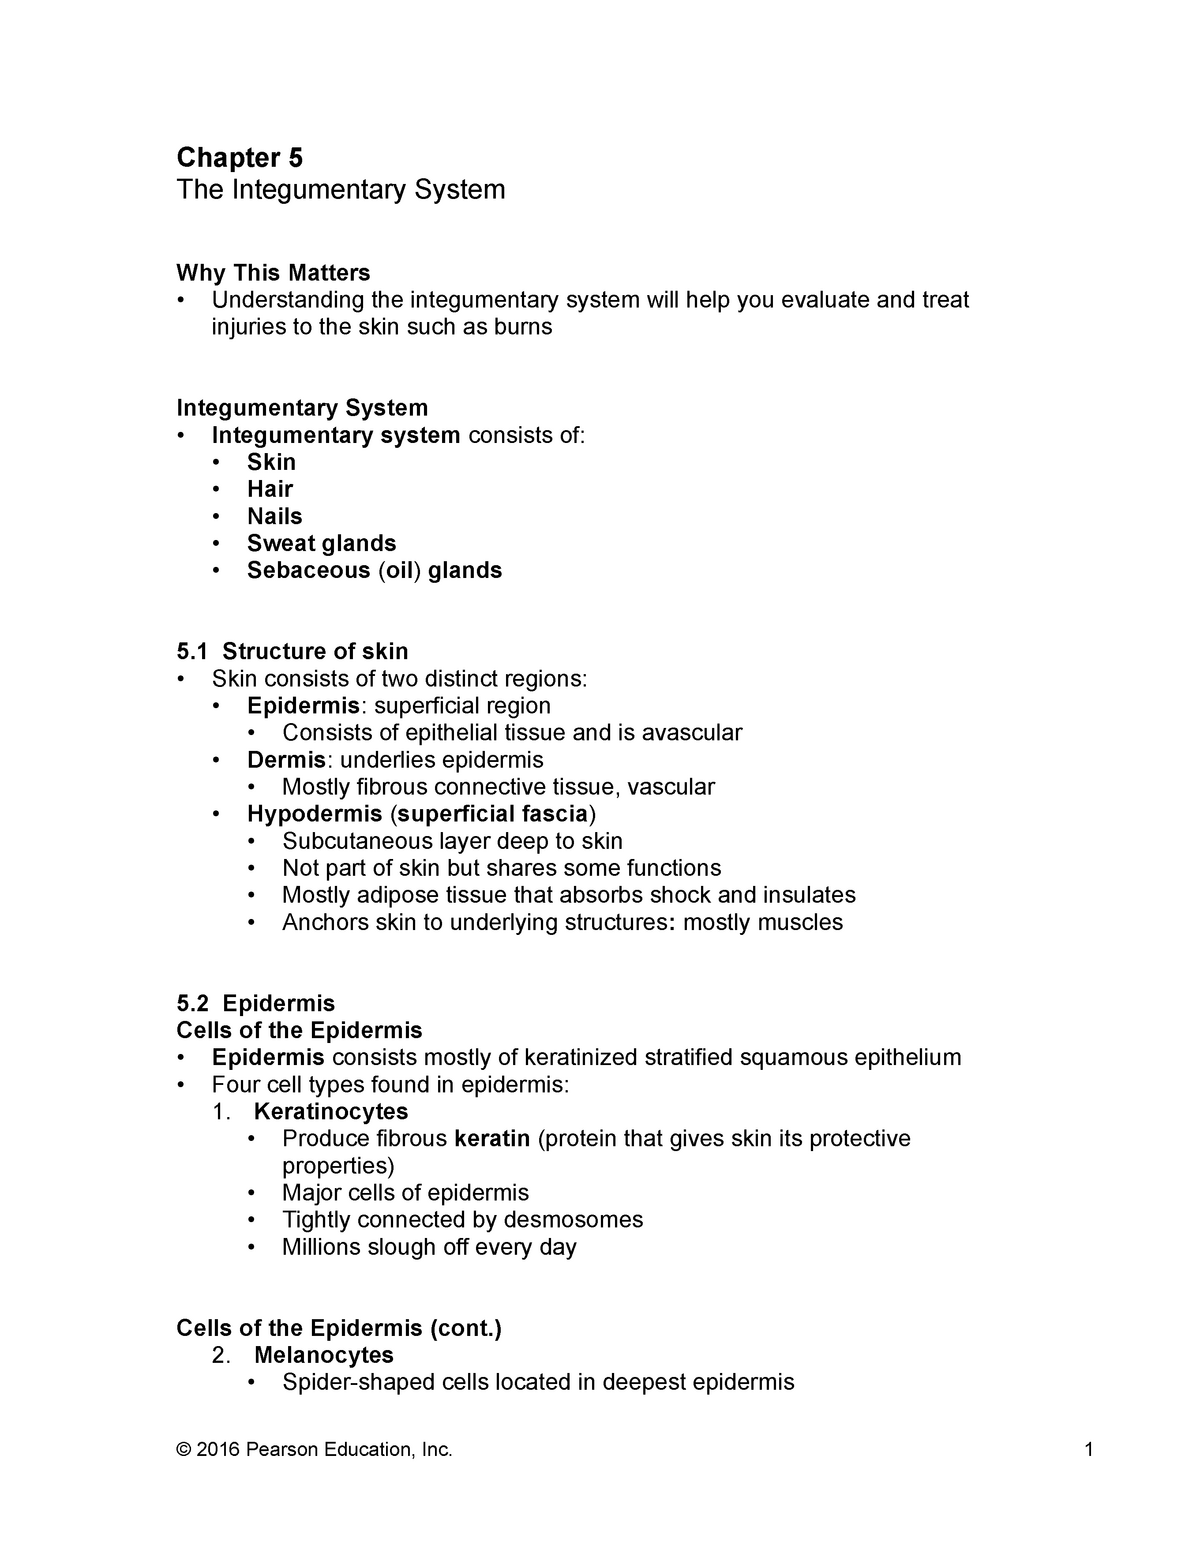 ch-5-the-integumentary-system-lecture-notes-chapter-5-the